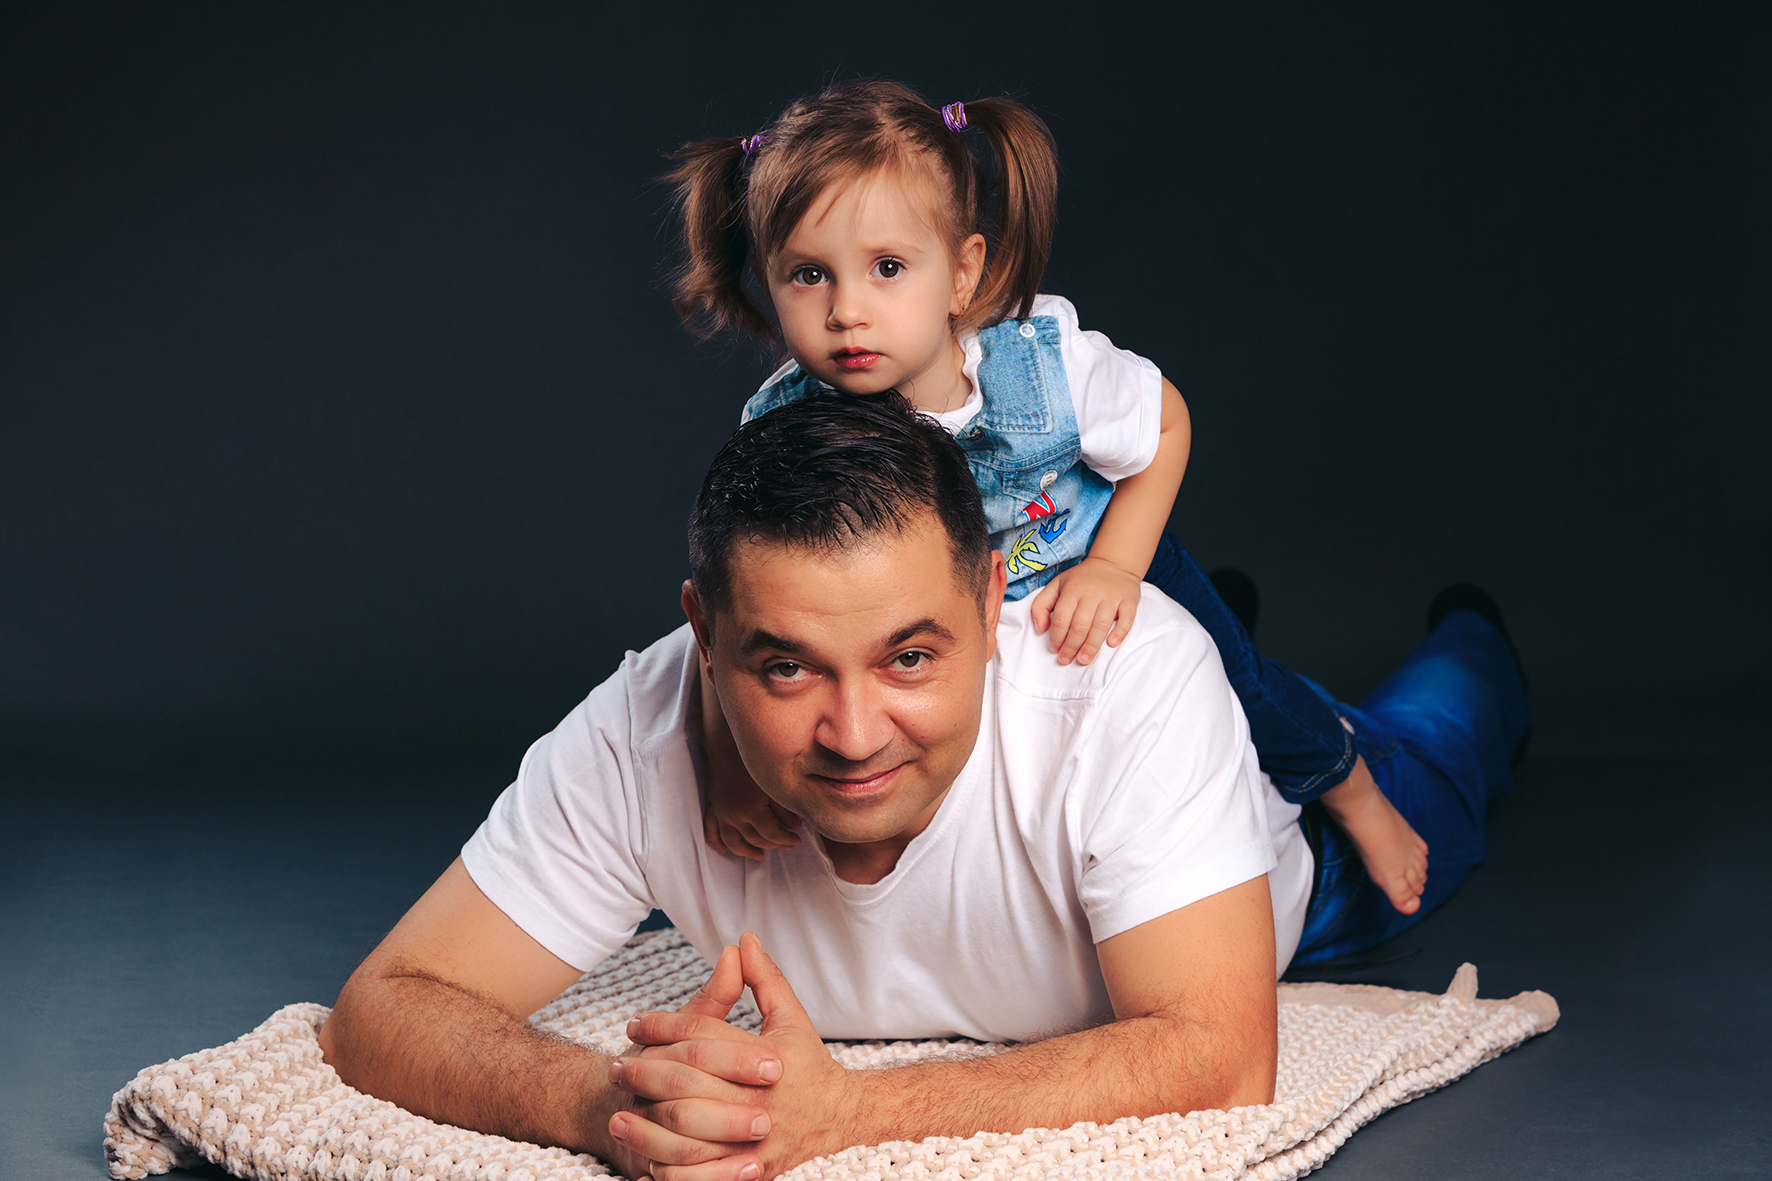 Family photo session with best photographers and professional videographers team – VIO IMAGE